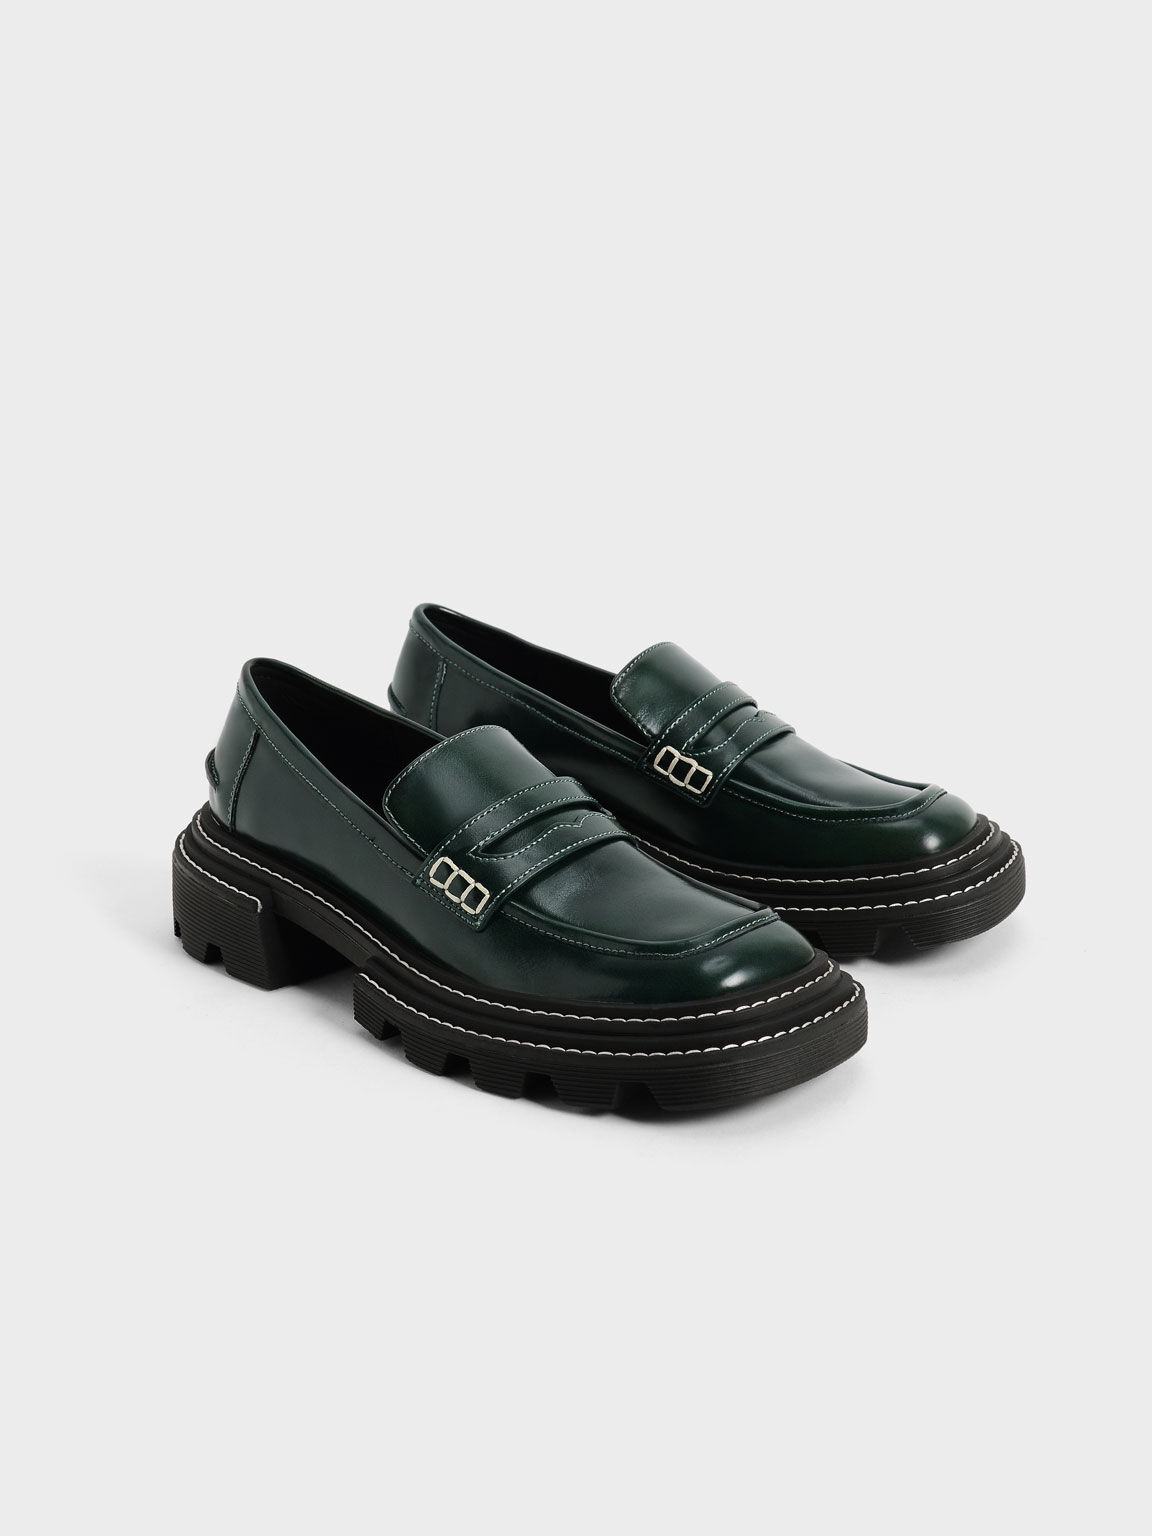 Perline Chunky Penny Loafers, Dark Green, hi-res